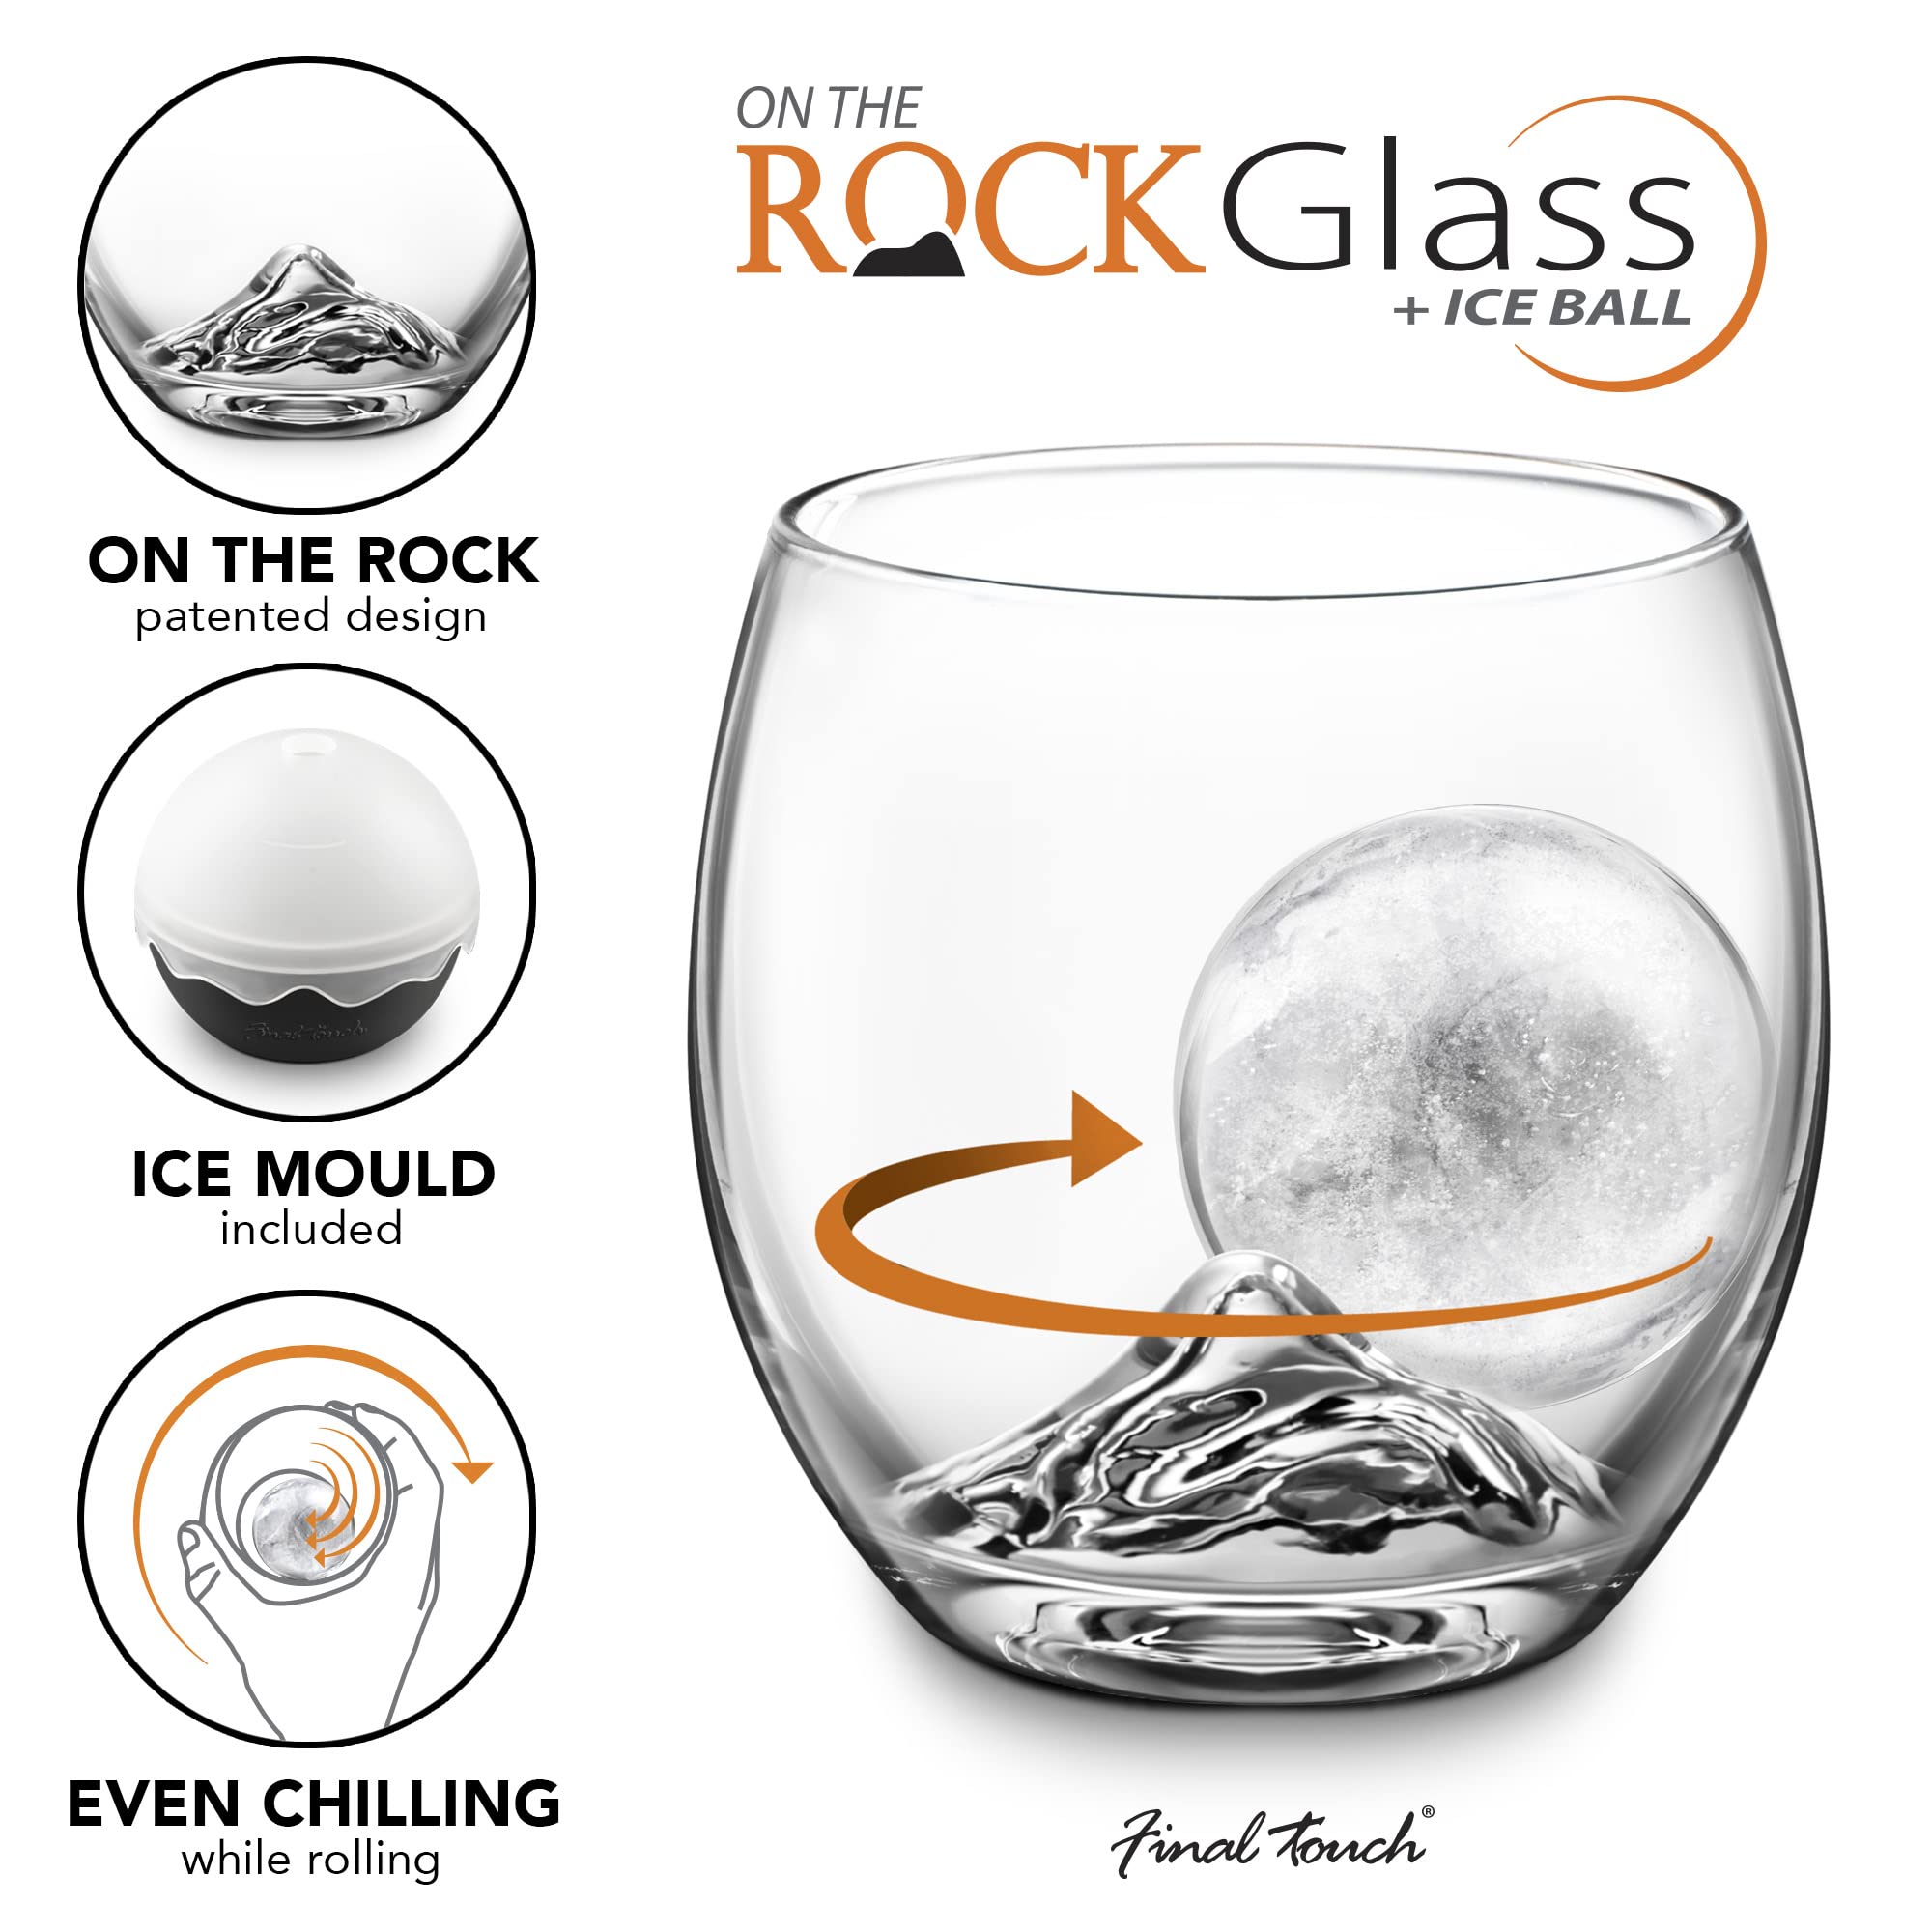 On the Rock Glass and Ice Ball